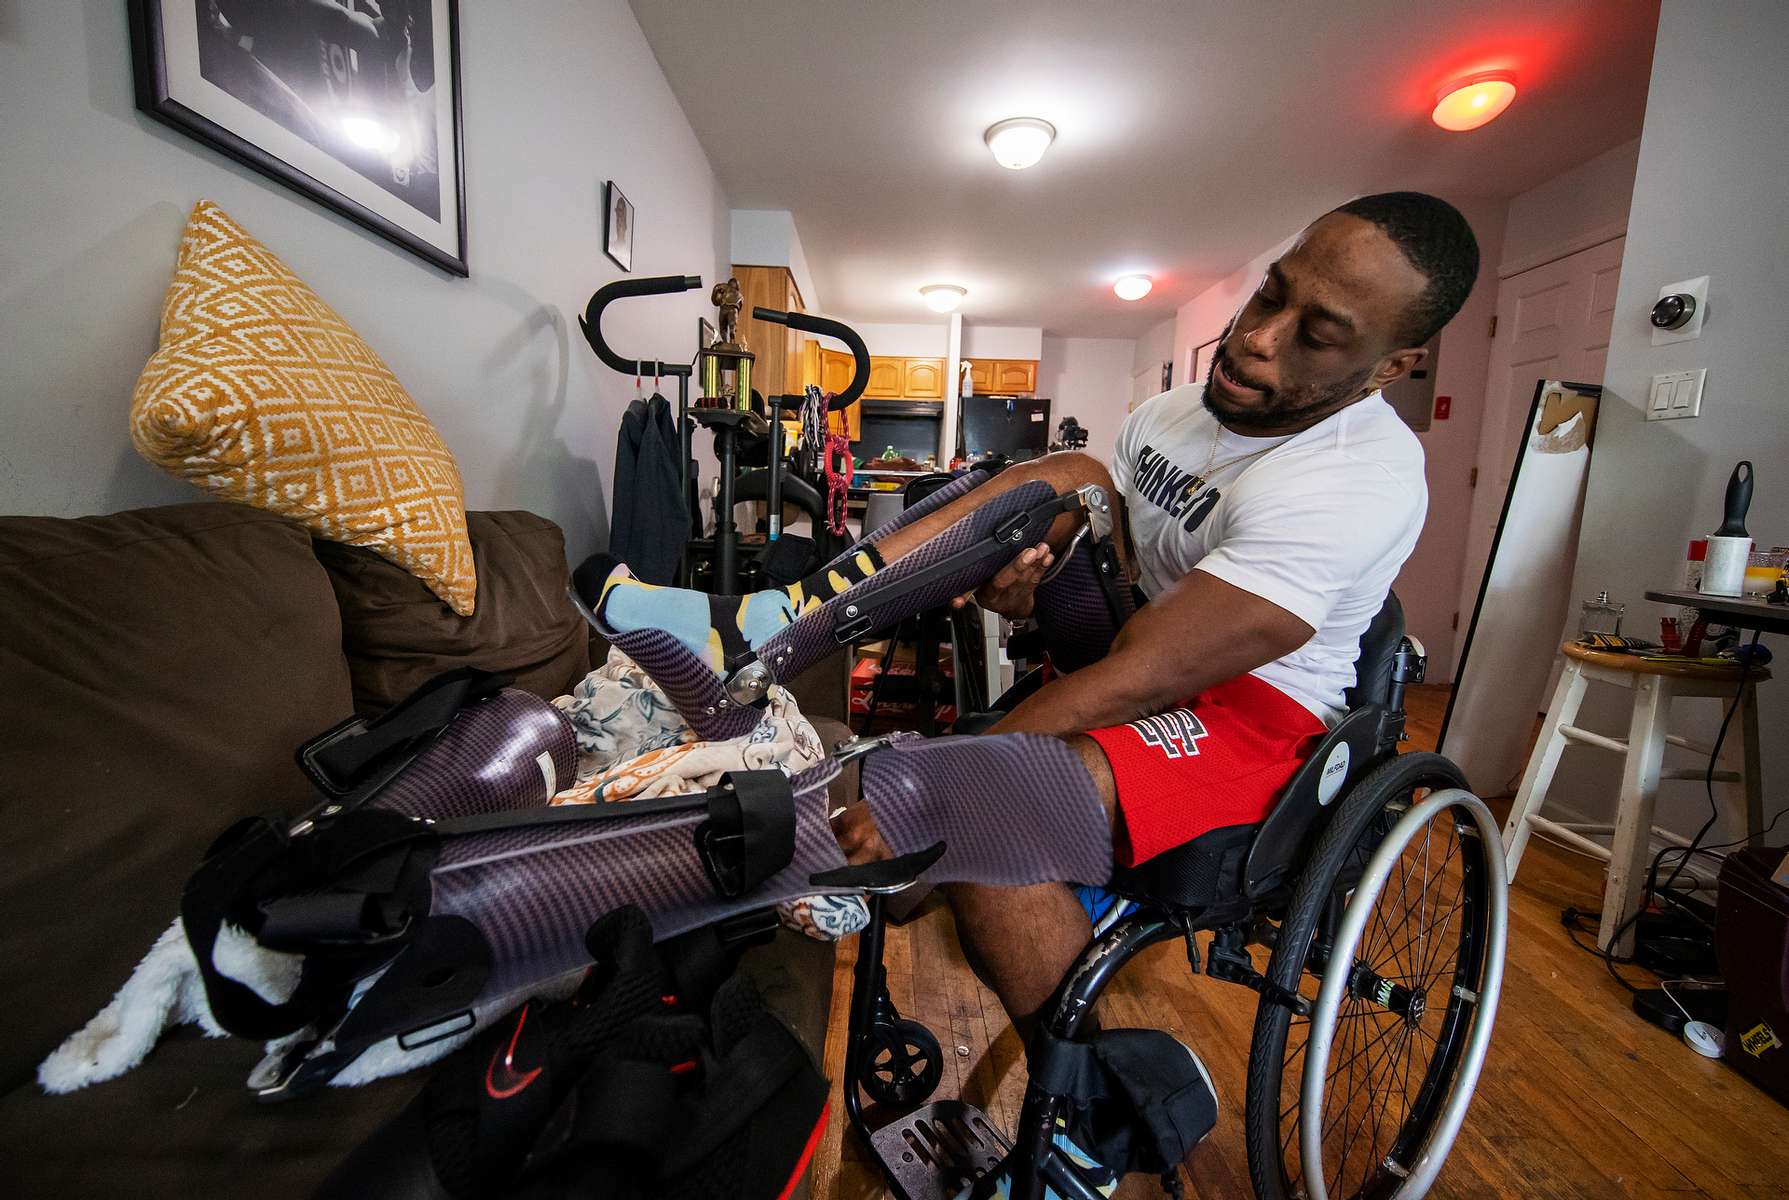 Team USA Para Powerlifter Garrison Redd installs Kafo Leg braces that secure his legs, knees, and ankles.   Once the braces are installed to his legs he is able to walk using his upper body strength,  and assistance of a walker on October 25, 2021 in Brooklyn, New York.  